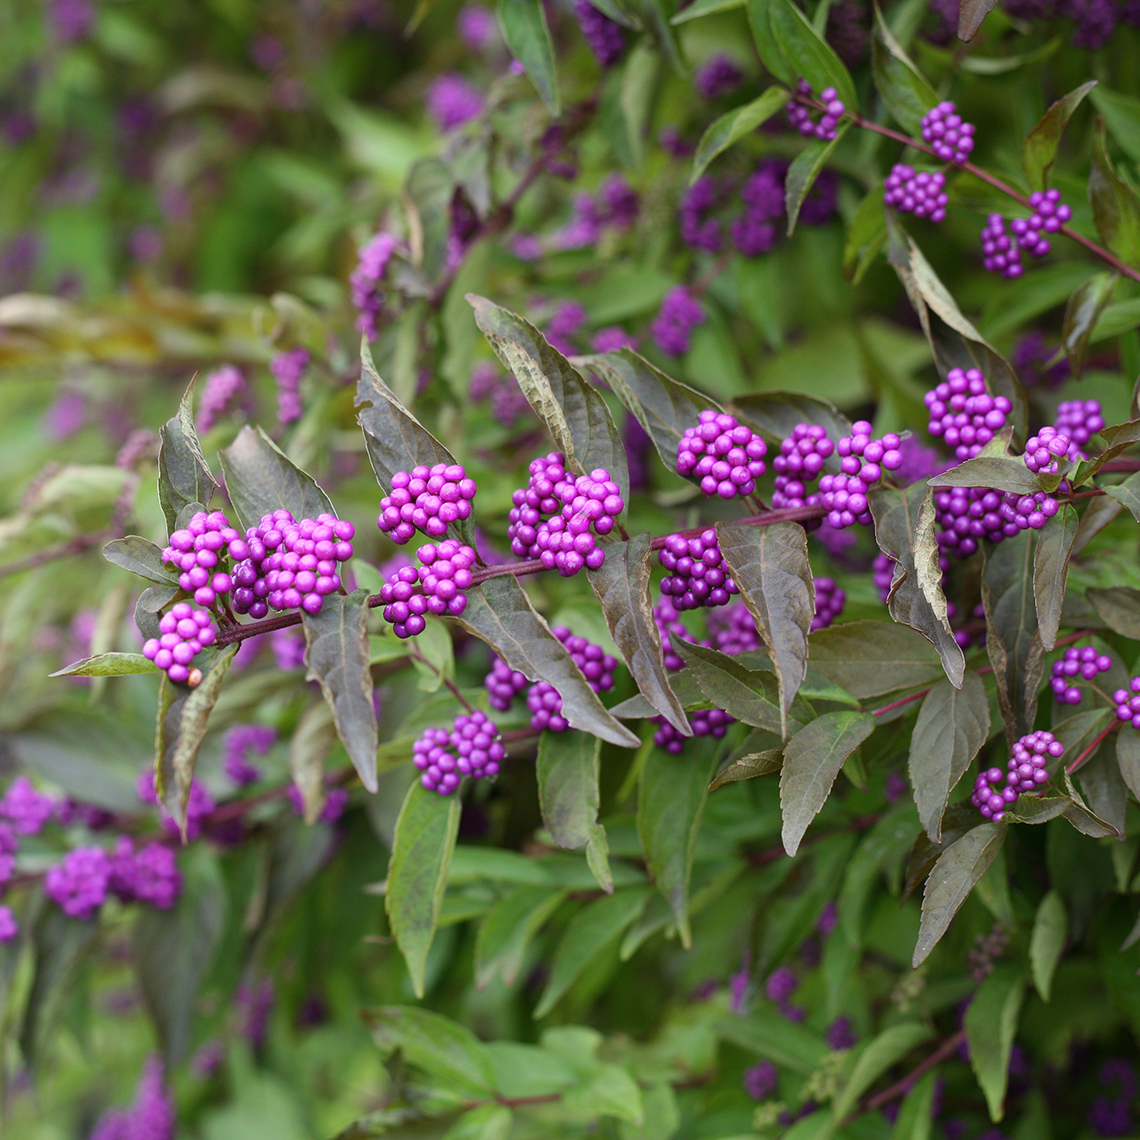 Close up of Callicarpa Early Amethyst with purple berries